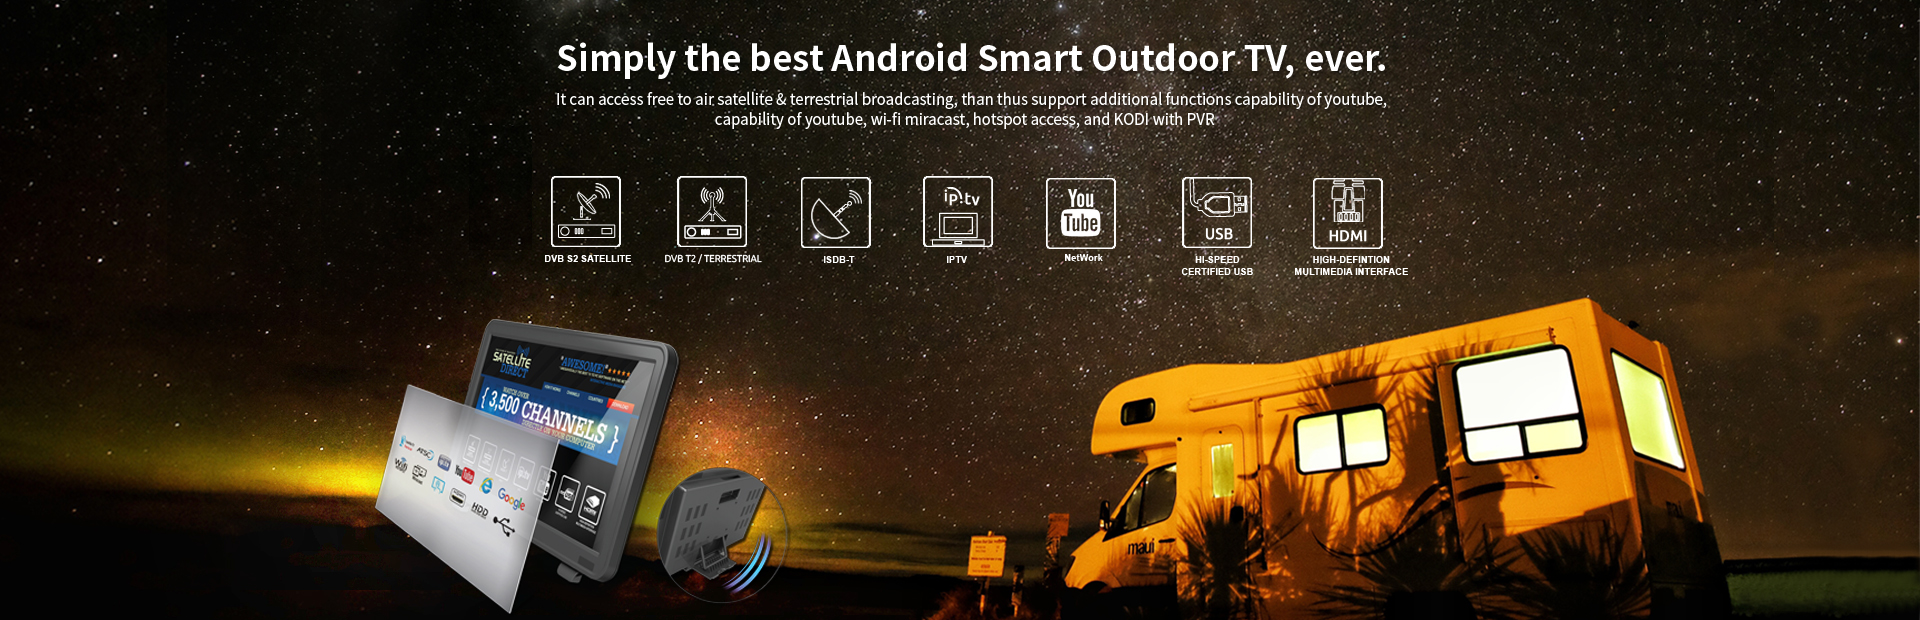 Simply the best Android Smart Outdoor TV, ever.